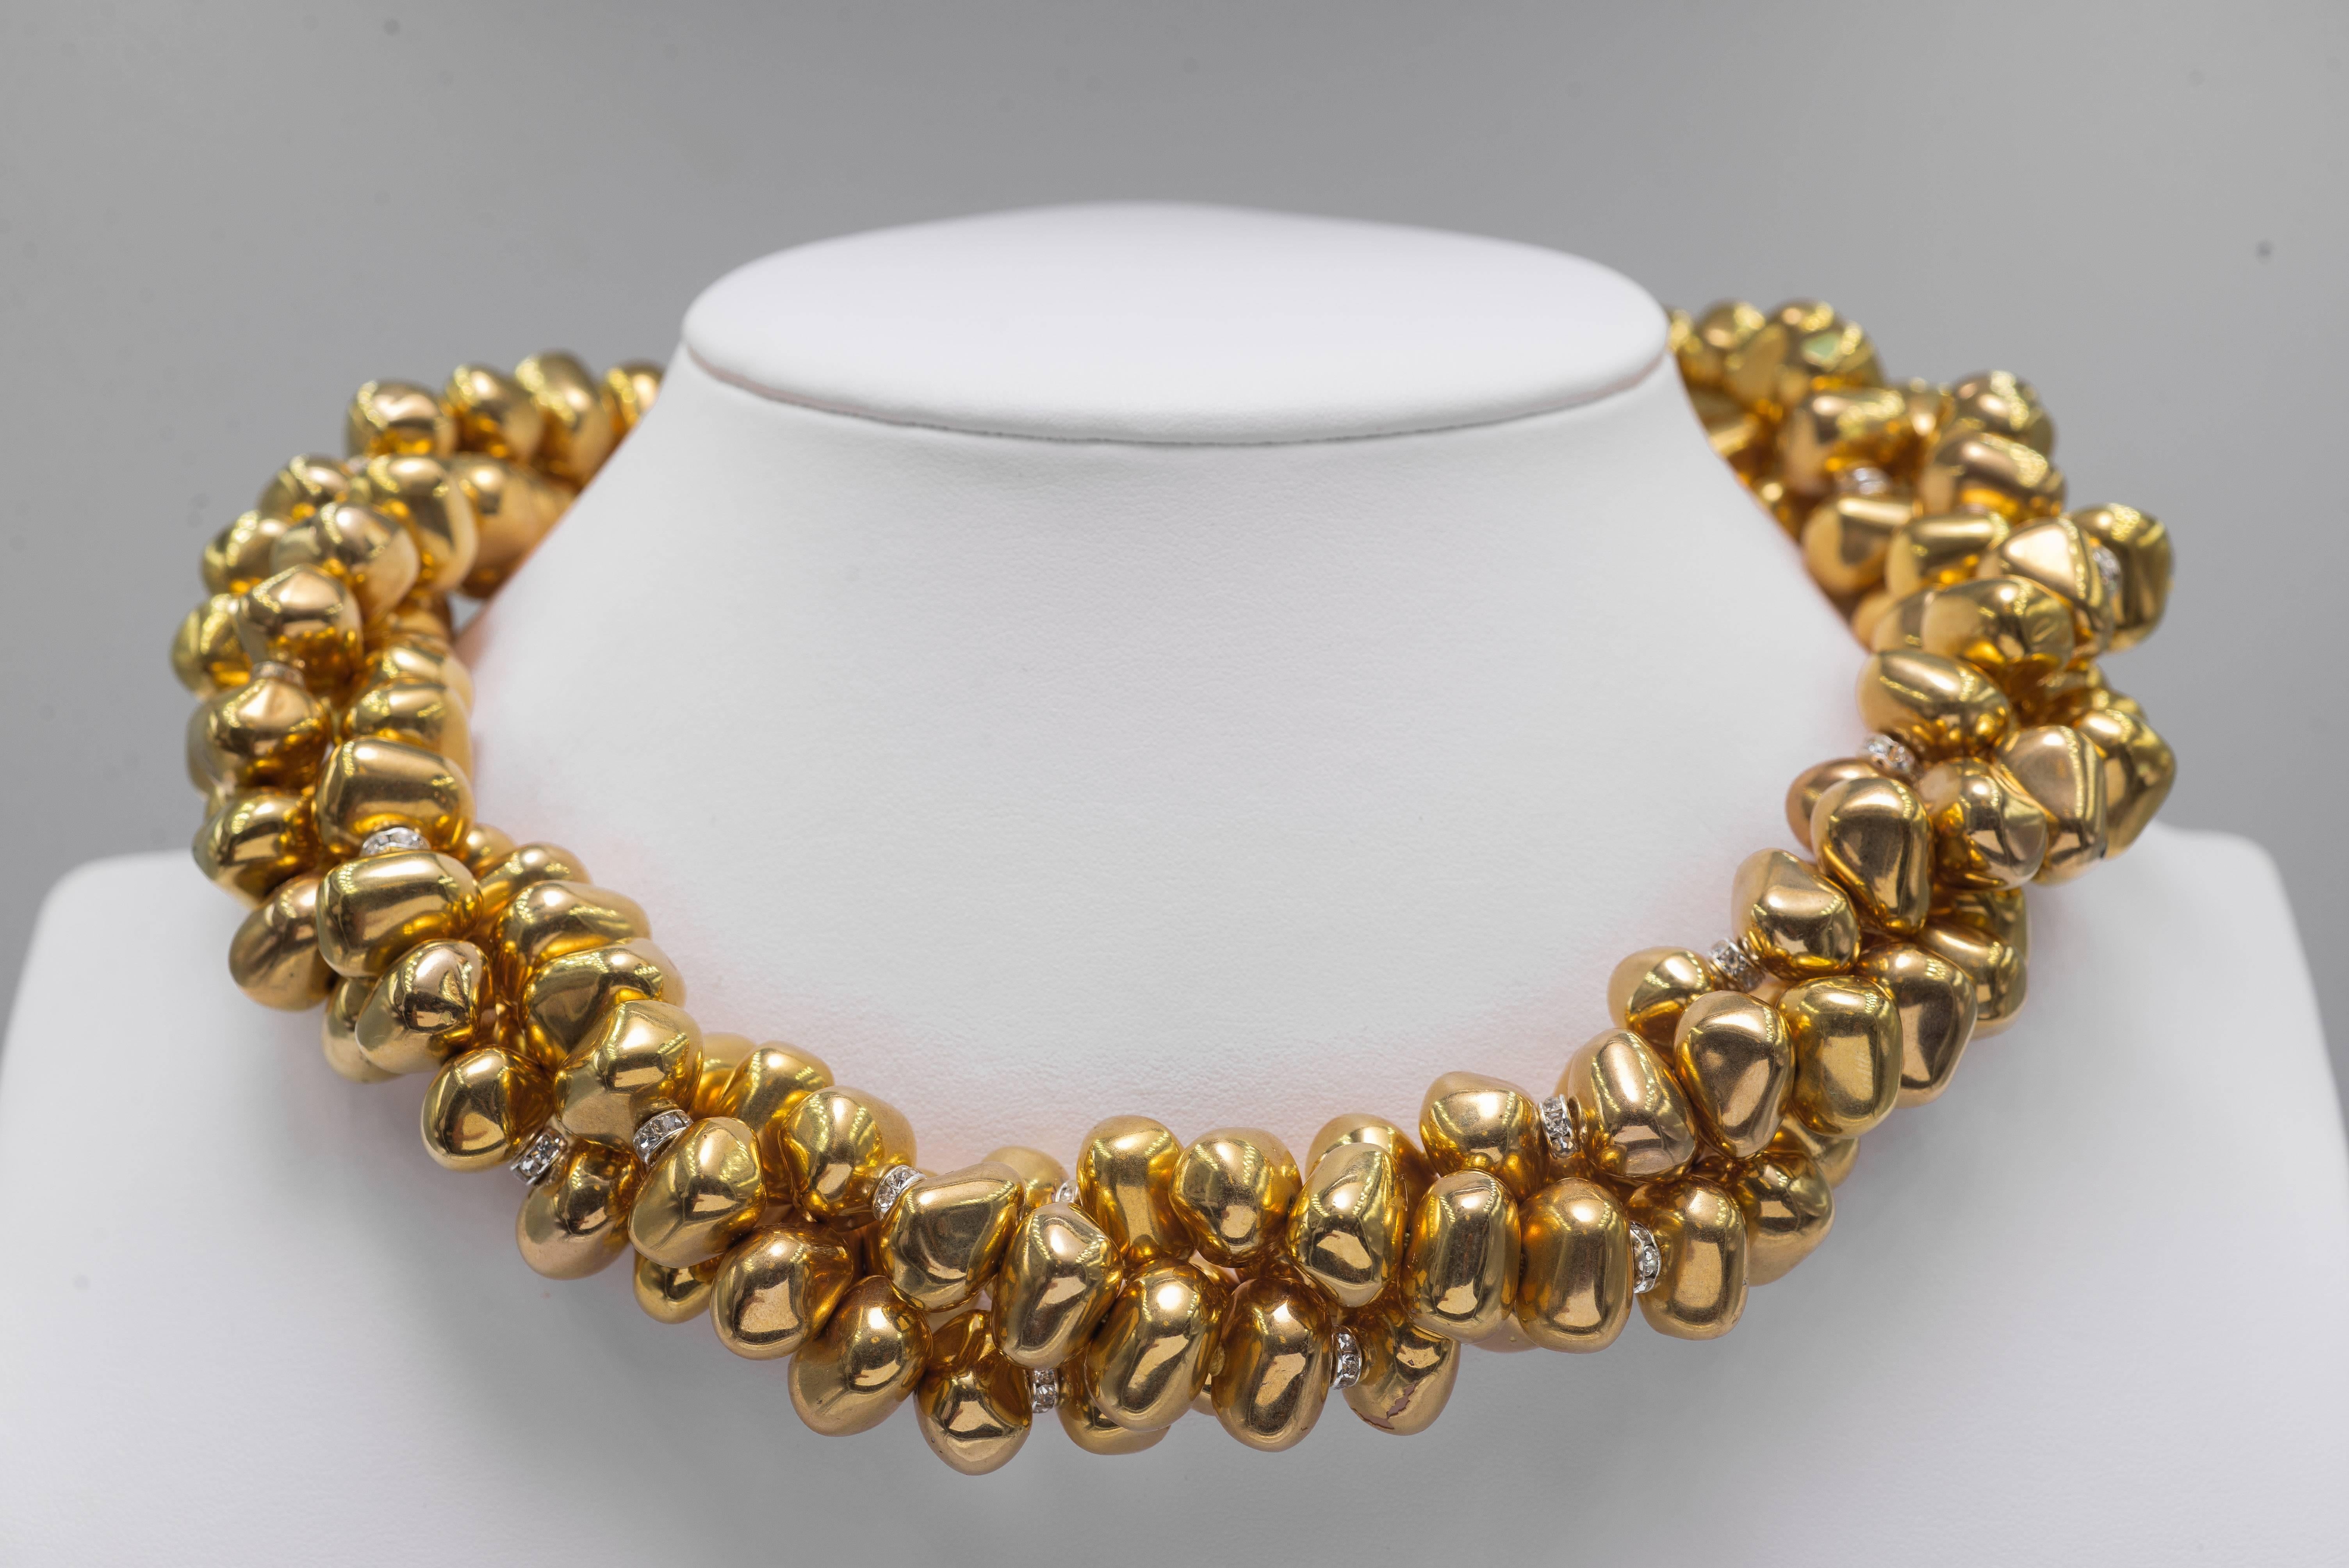 Vintage gilt nugget 15mm beads crystal rondel triple strand twist collar necklace attached to an amazing unique zircon set sterling clasp that alone measures 4 inches long.
Fits an easy 18''+ neckline